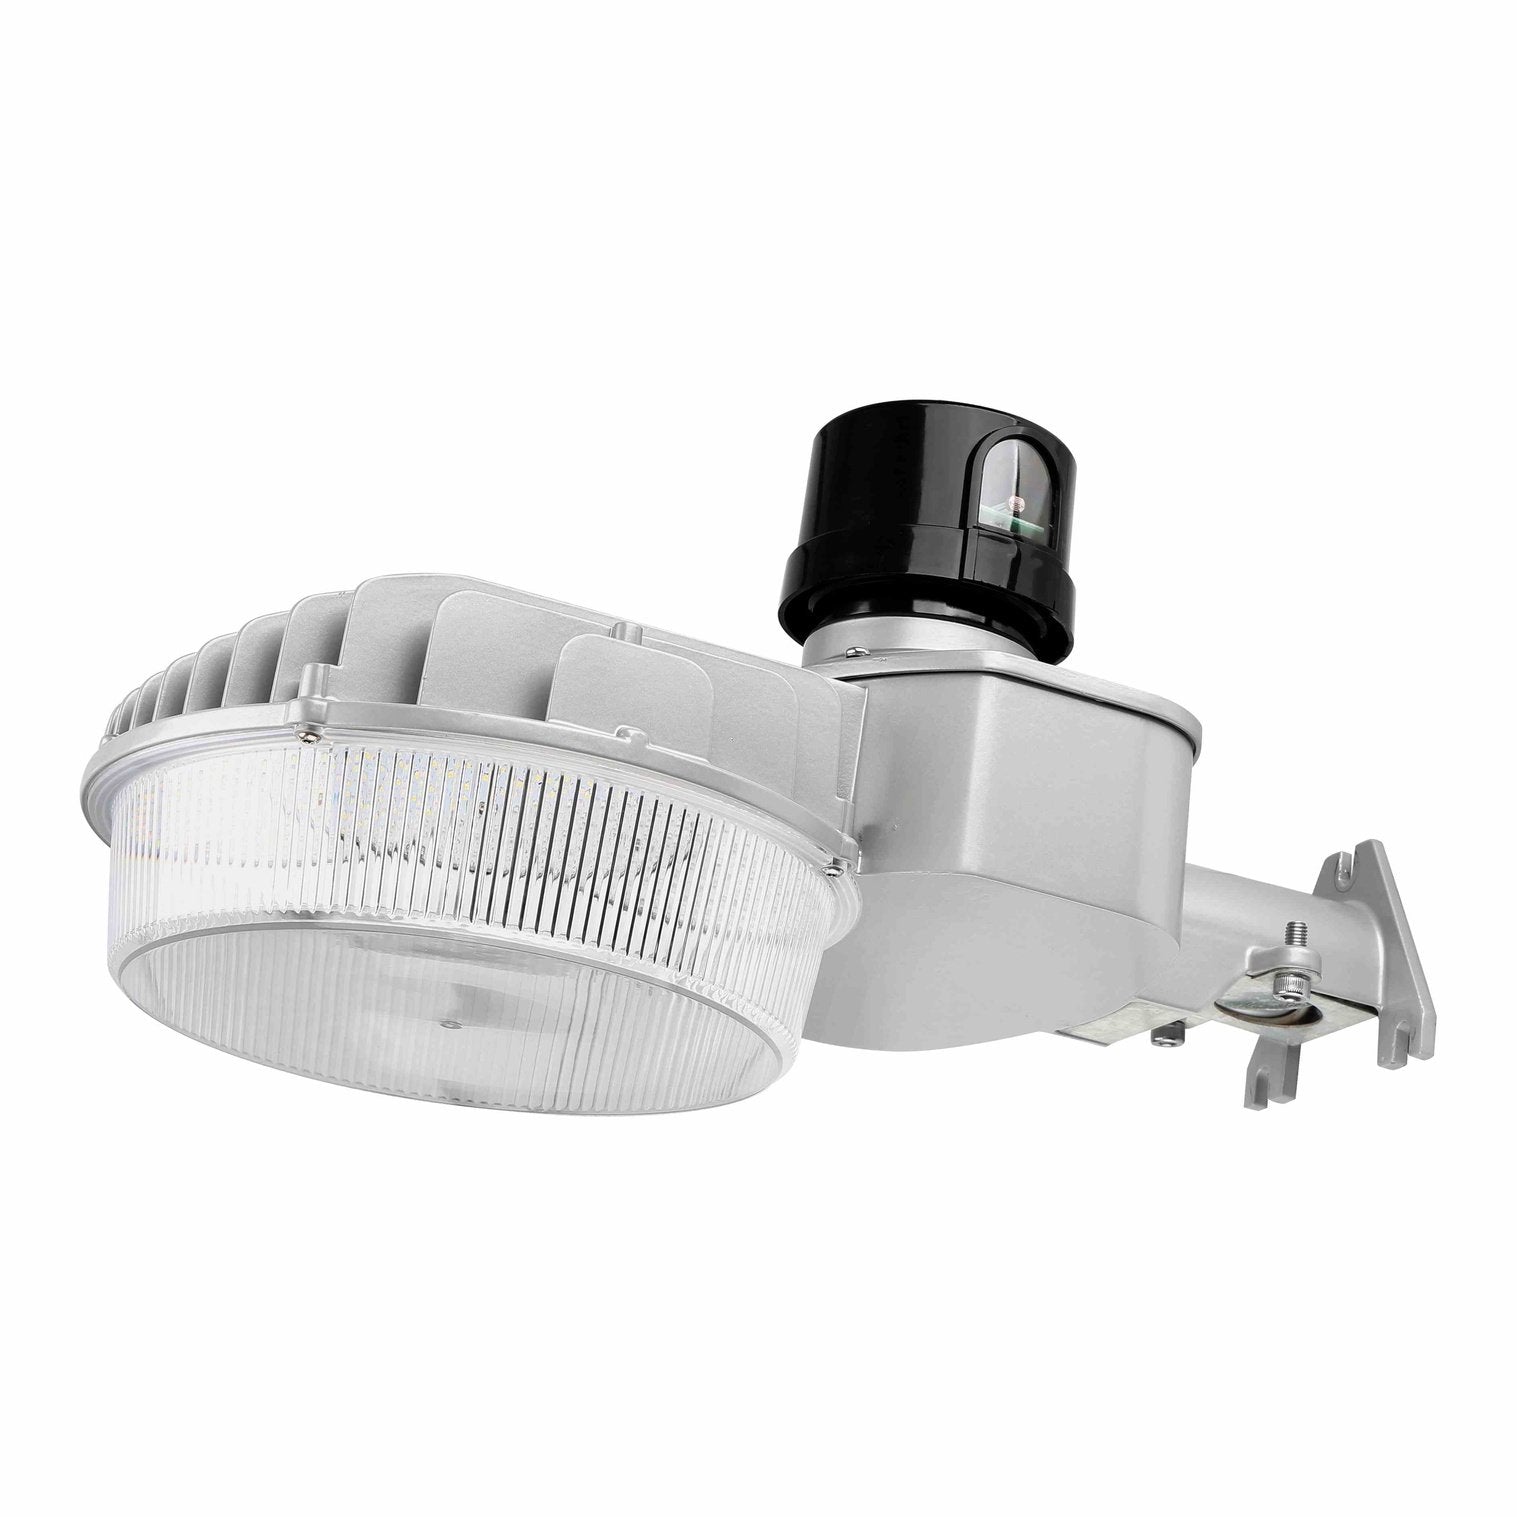 MDD05 LED Dusk to Dawn Barn Light with Photocell 65W, 8800LM, 120-277V